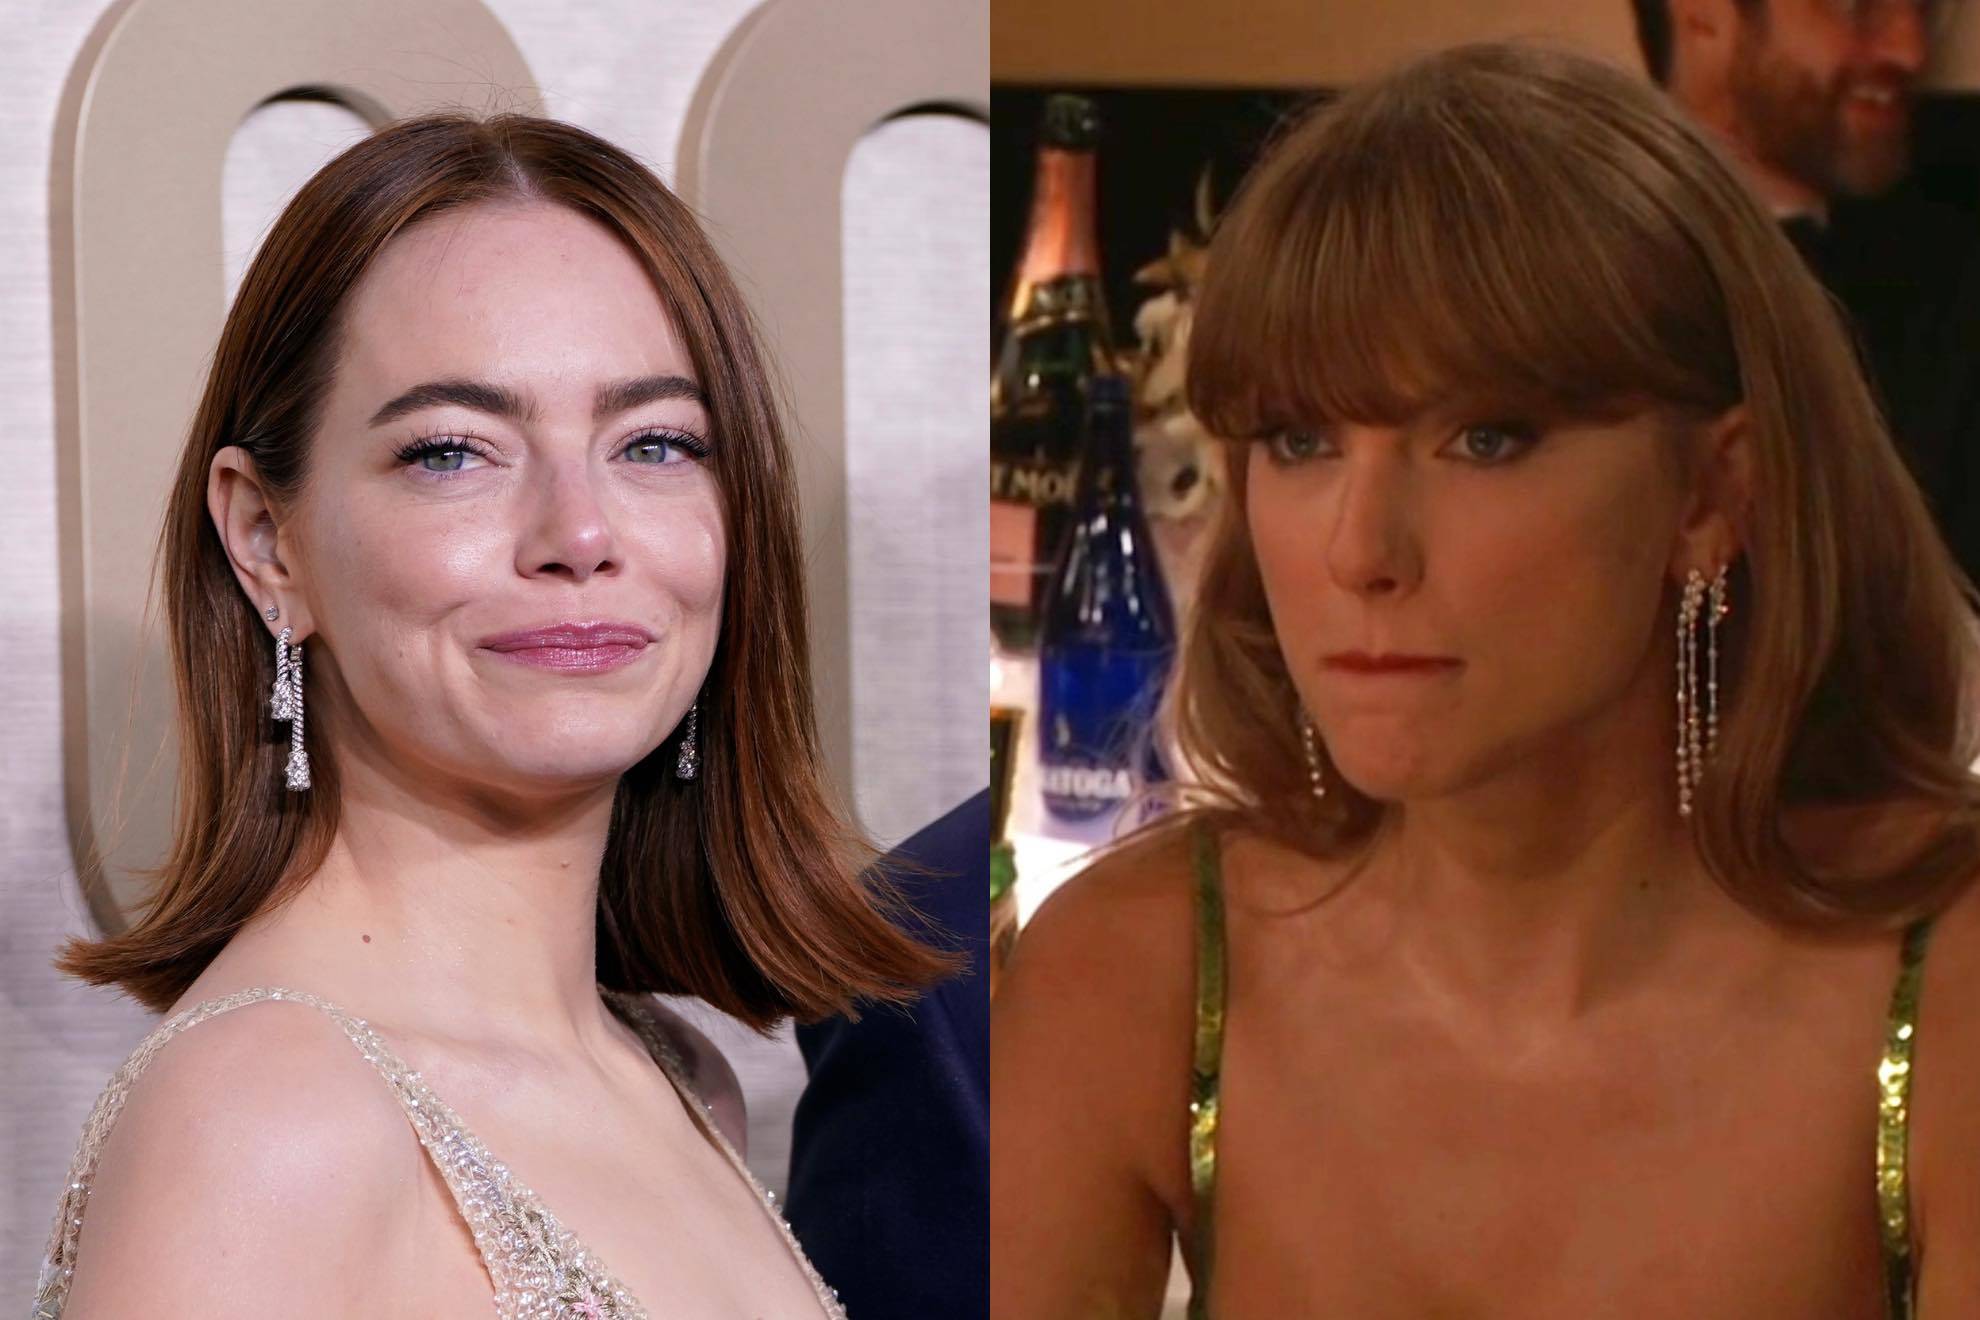 Emma Stone made a sarcastic remark about Taylor Swift